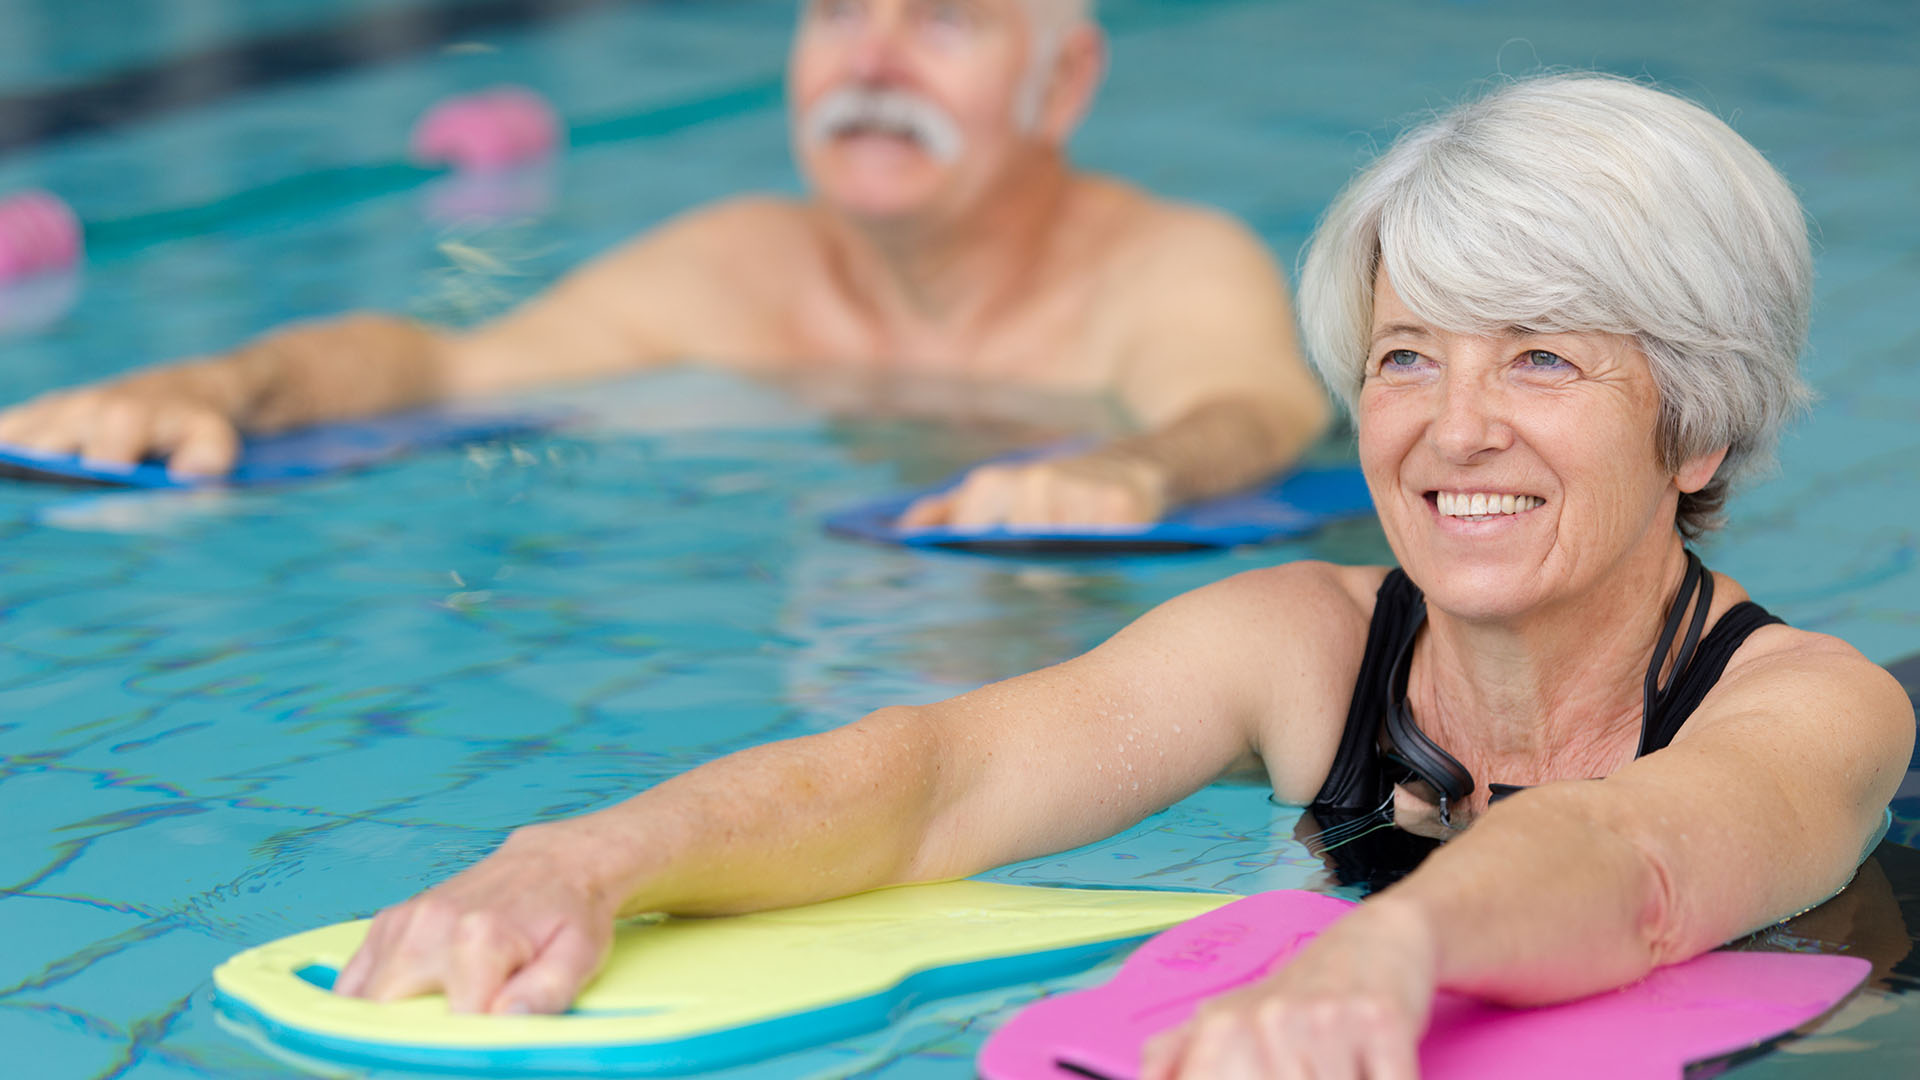 Older woman and man in pool with floats doing water aerobics and smiling